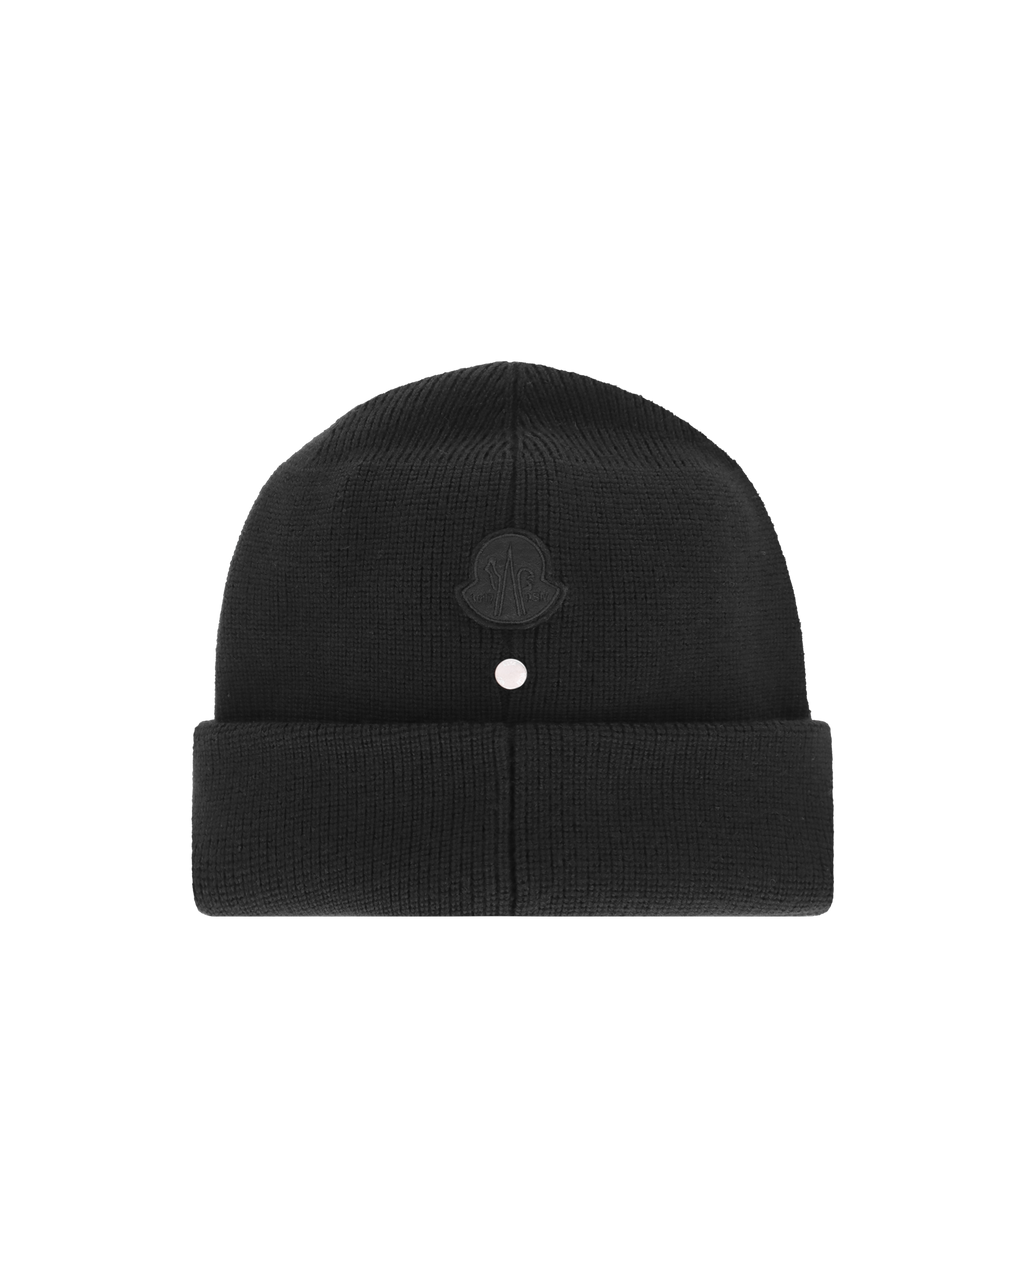 1017 ALYX 9SM | HATS | Explore the latest collection of 1017 ALYX